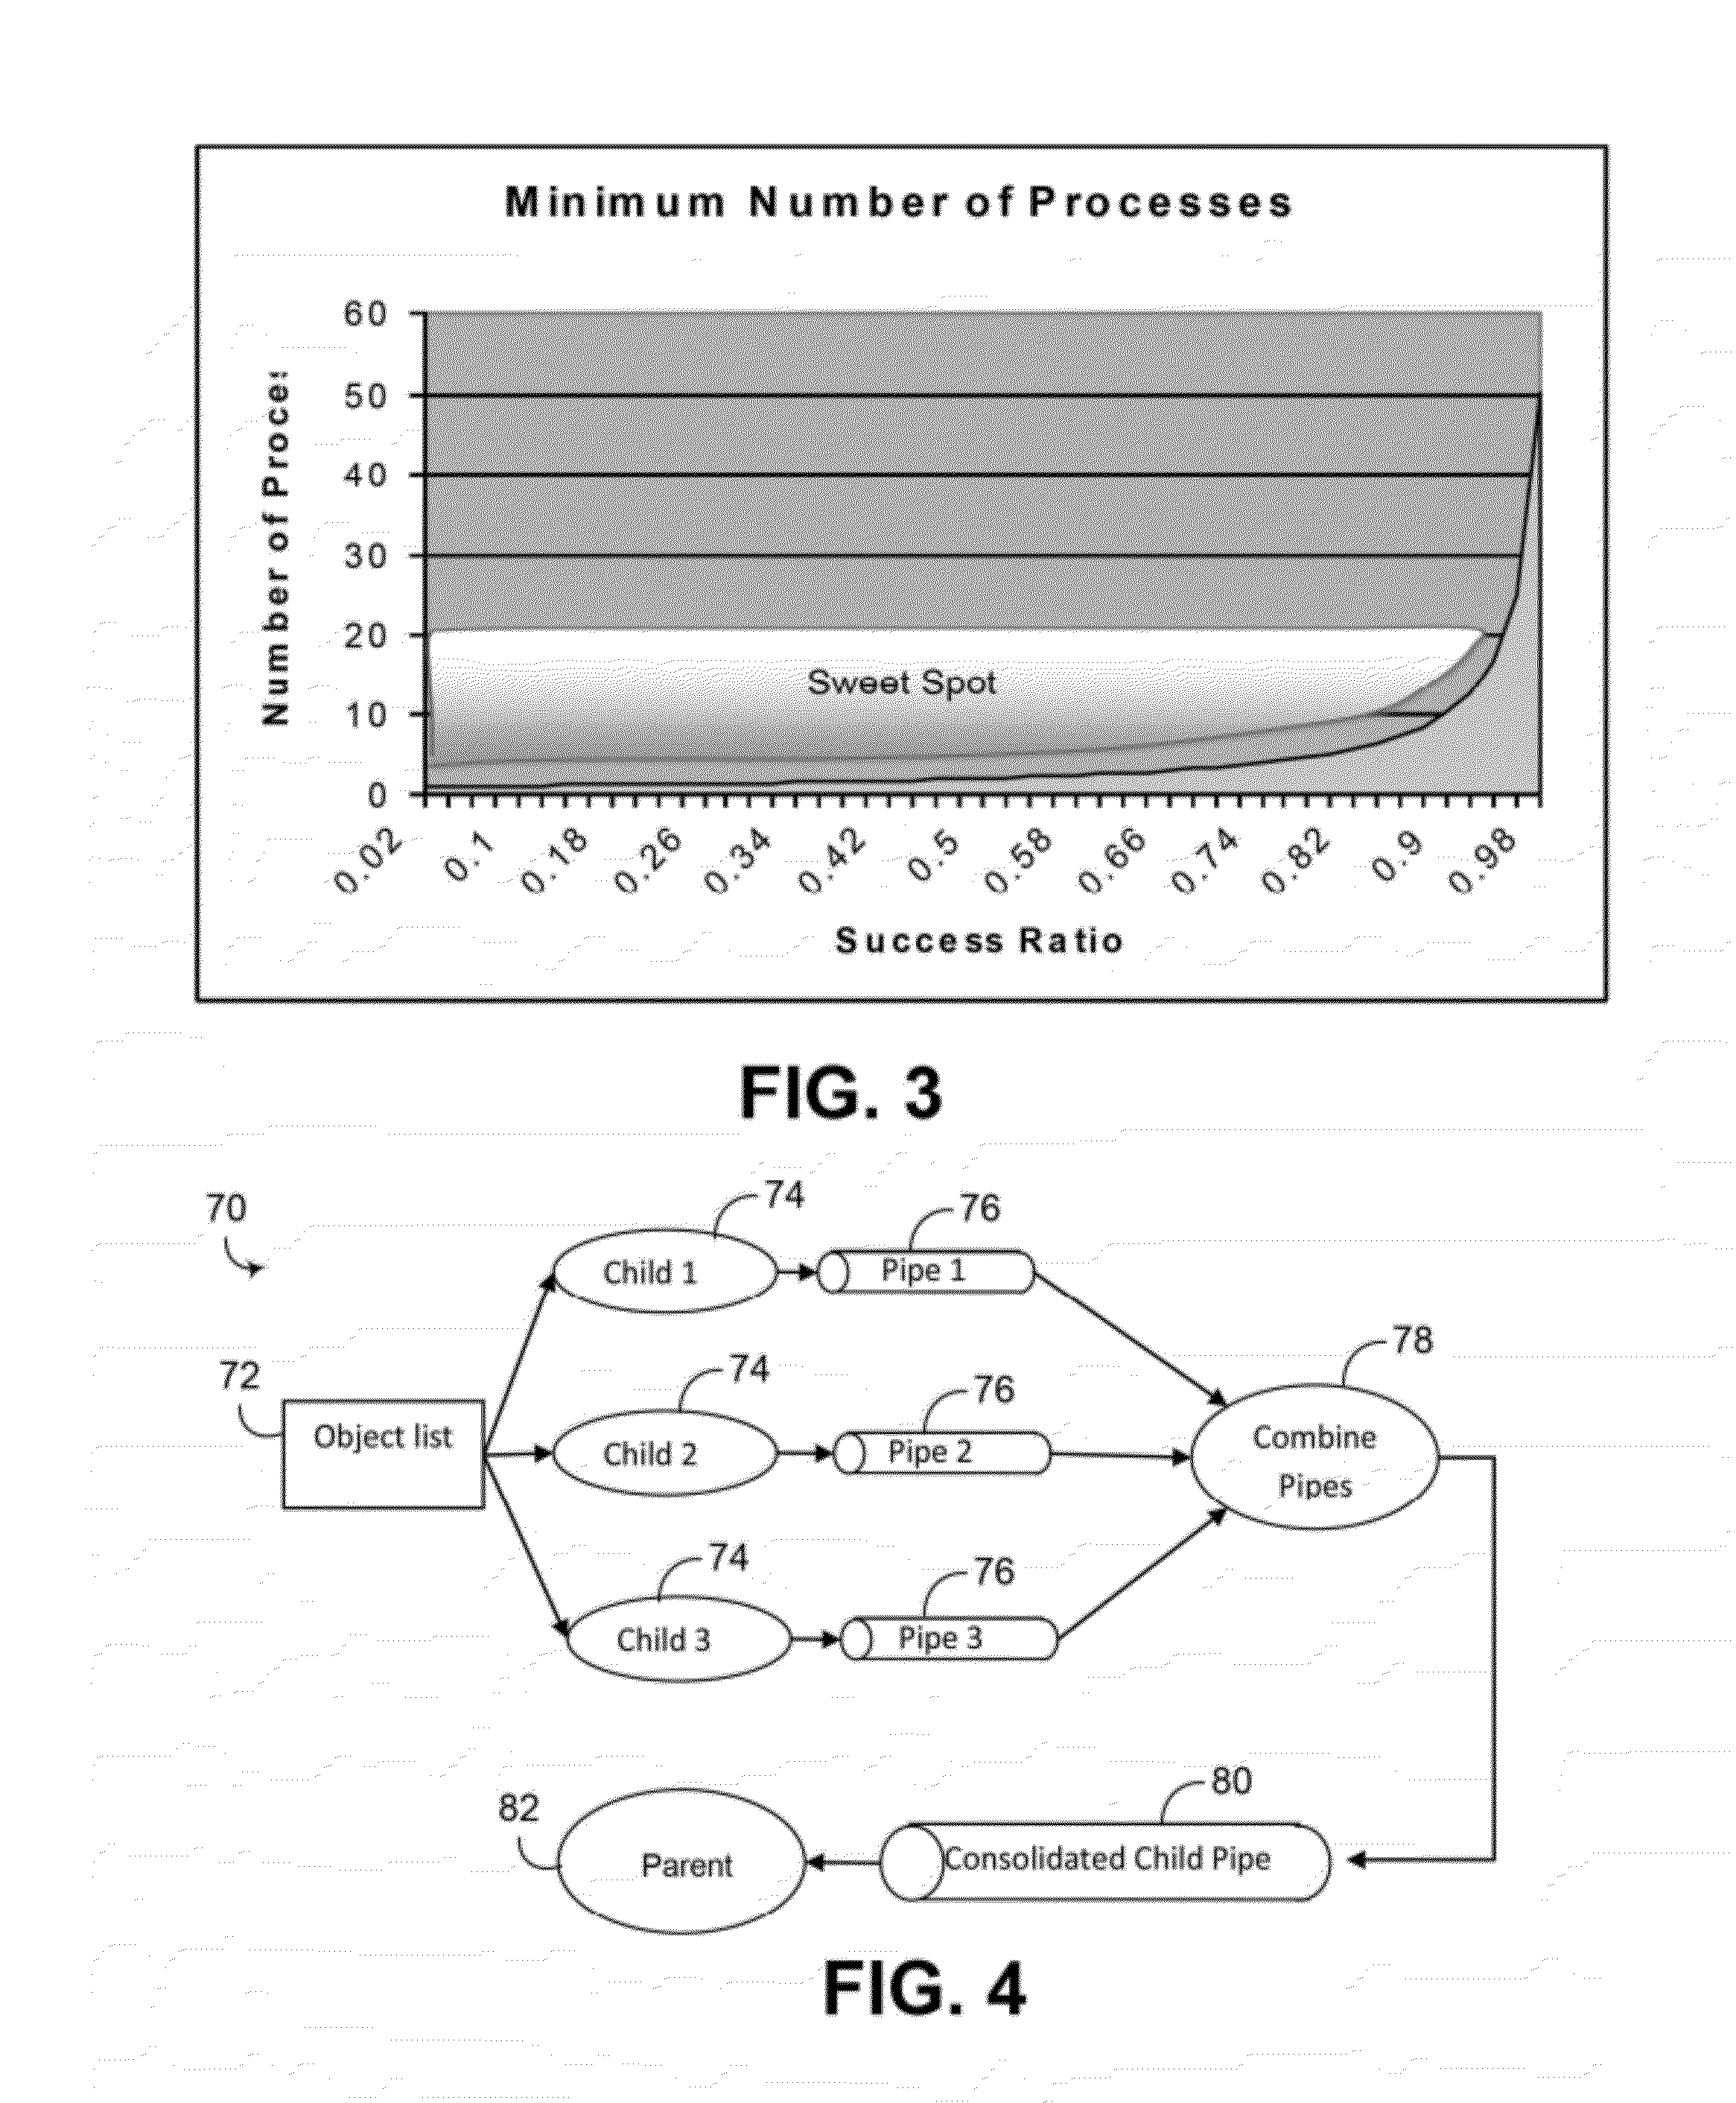 Task-based multi-process design synthesis with notification of transform signatures